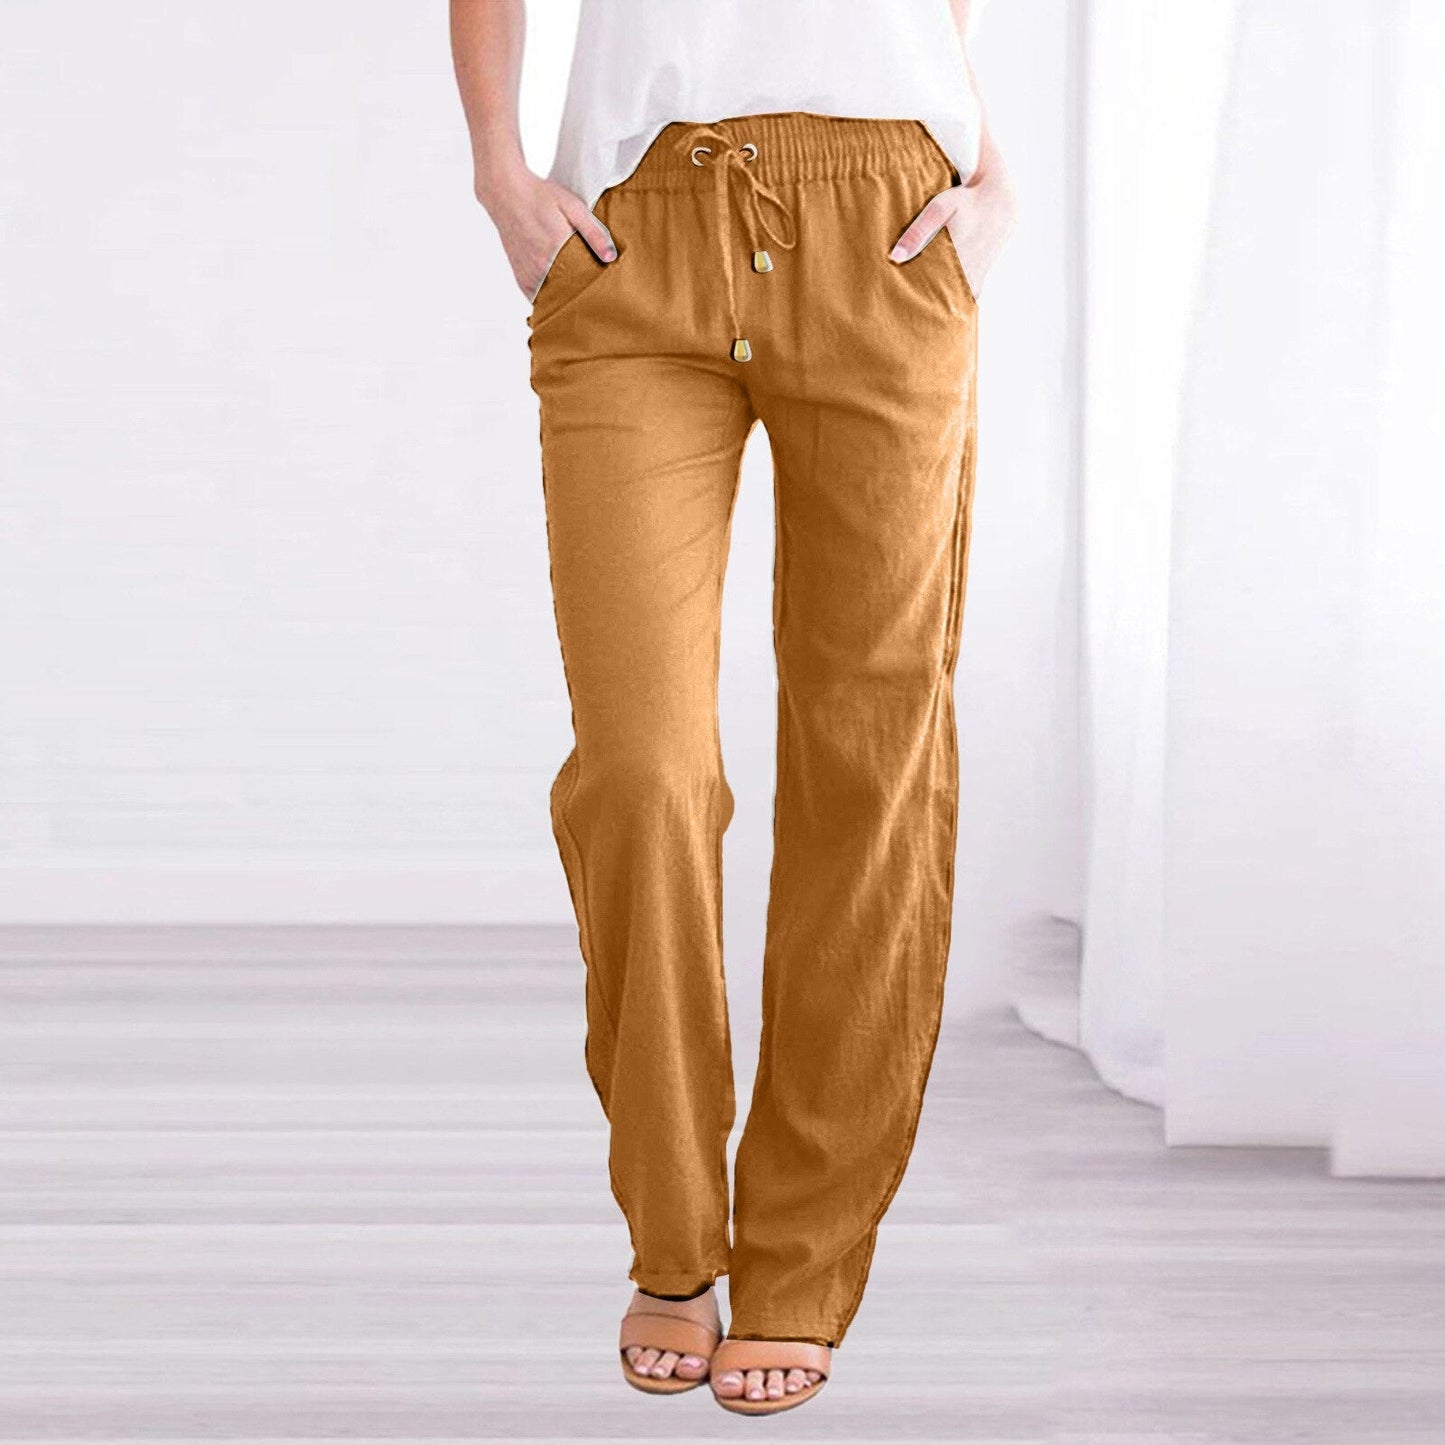 Straight Leg Trouser for Women Comfy Casual Cotton Pants with Pockets  Womens Fall Pants Casual